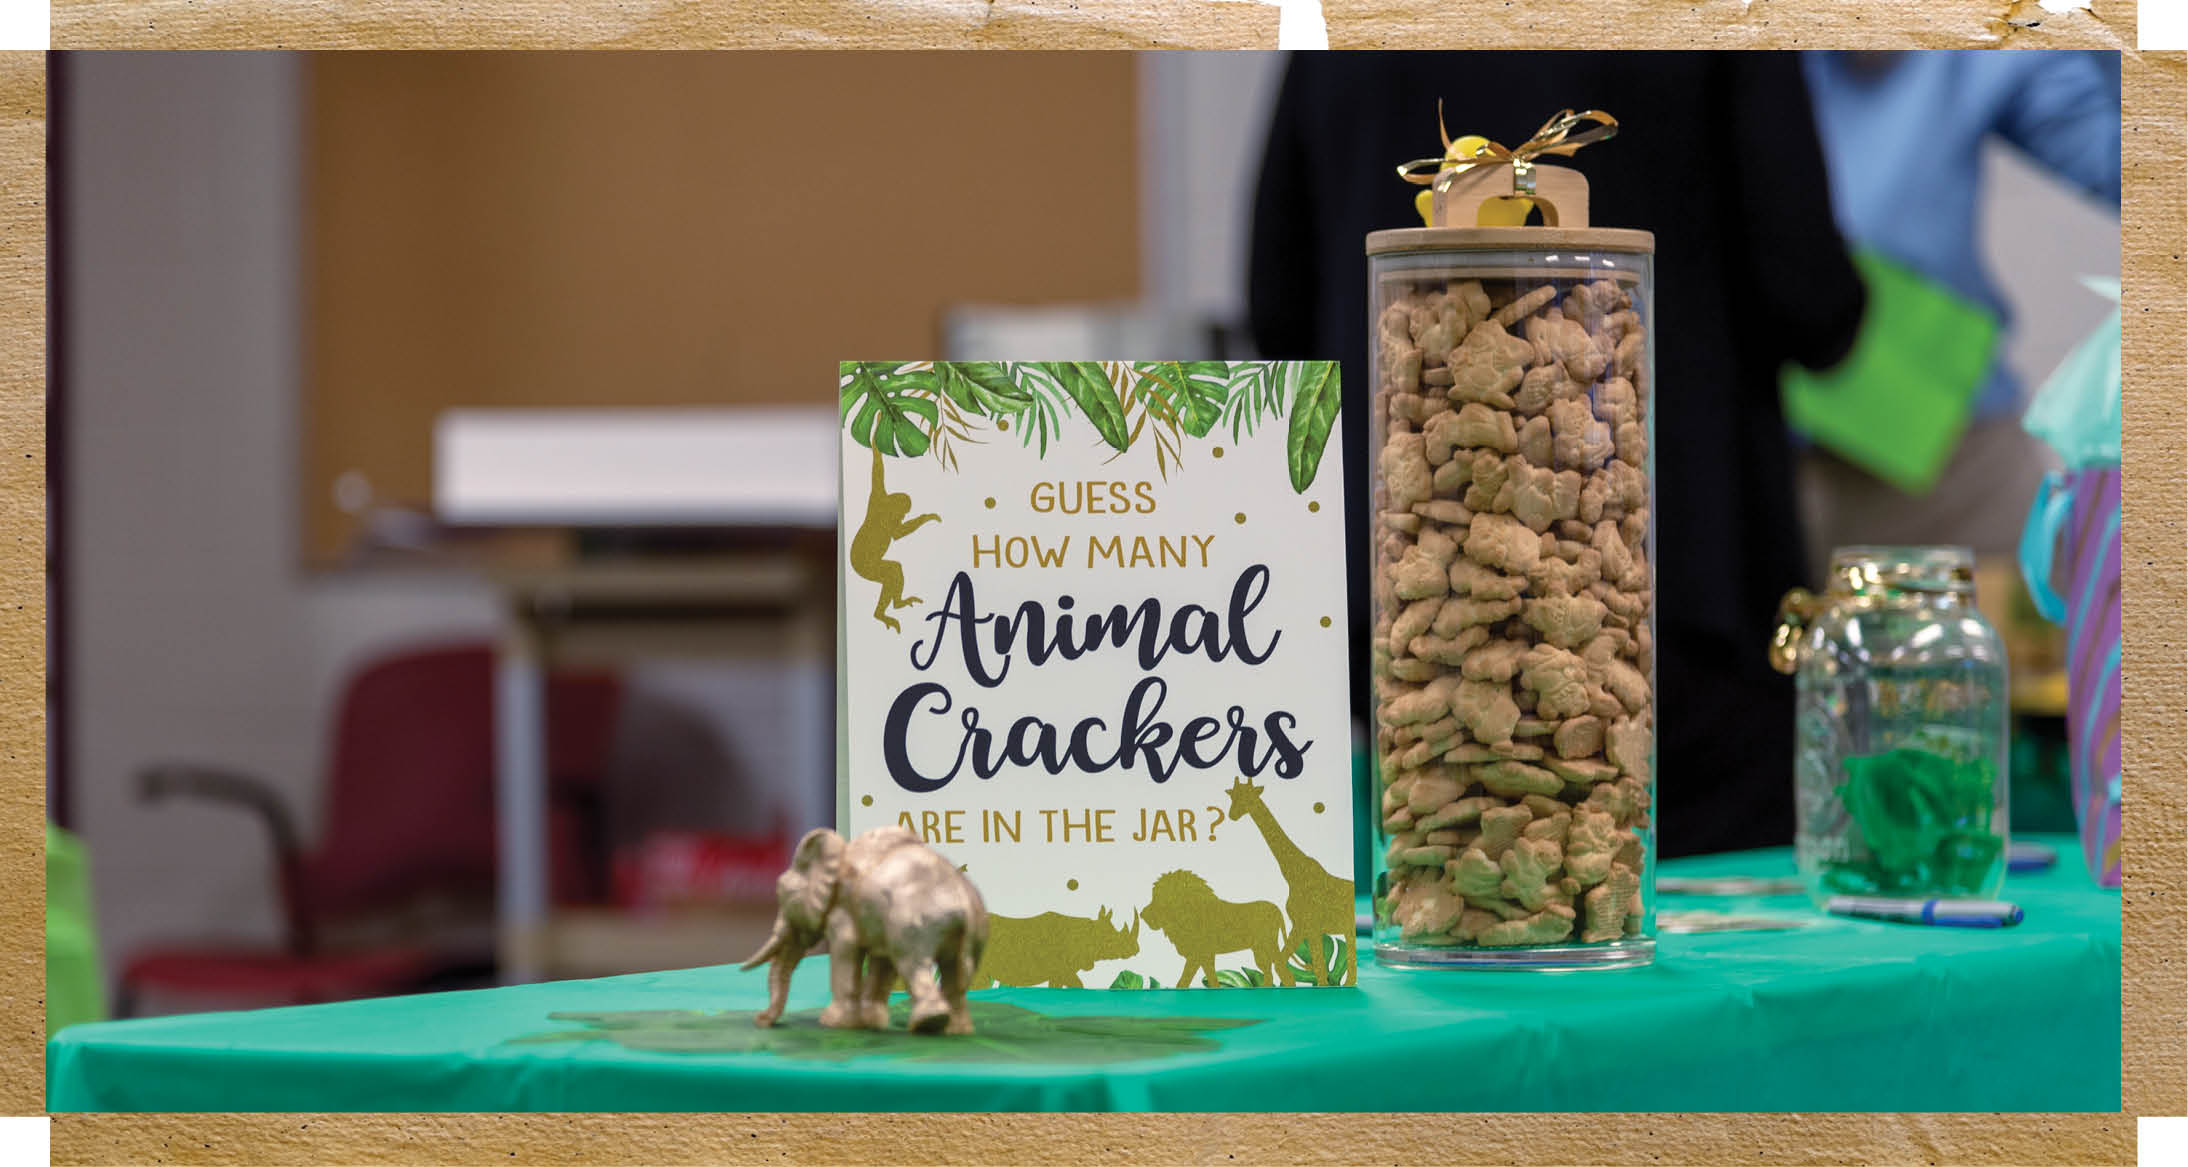 Guess how many animal crackers are in the jar table.